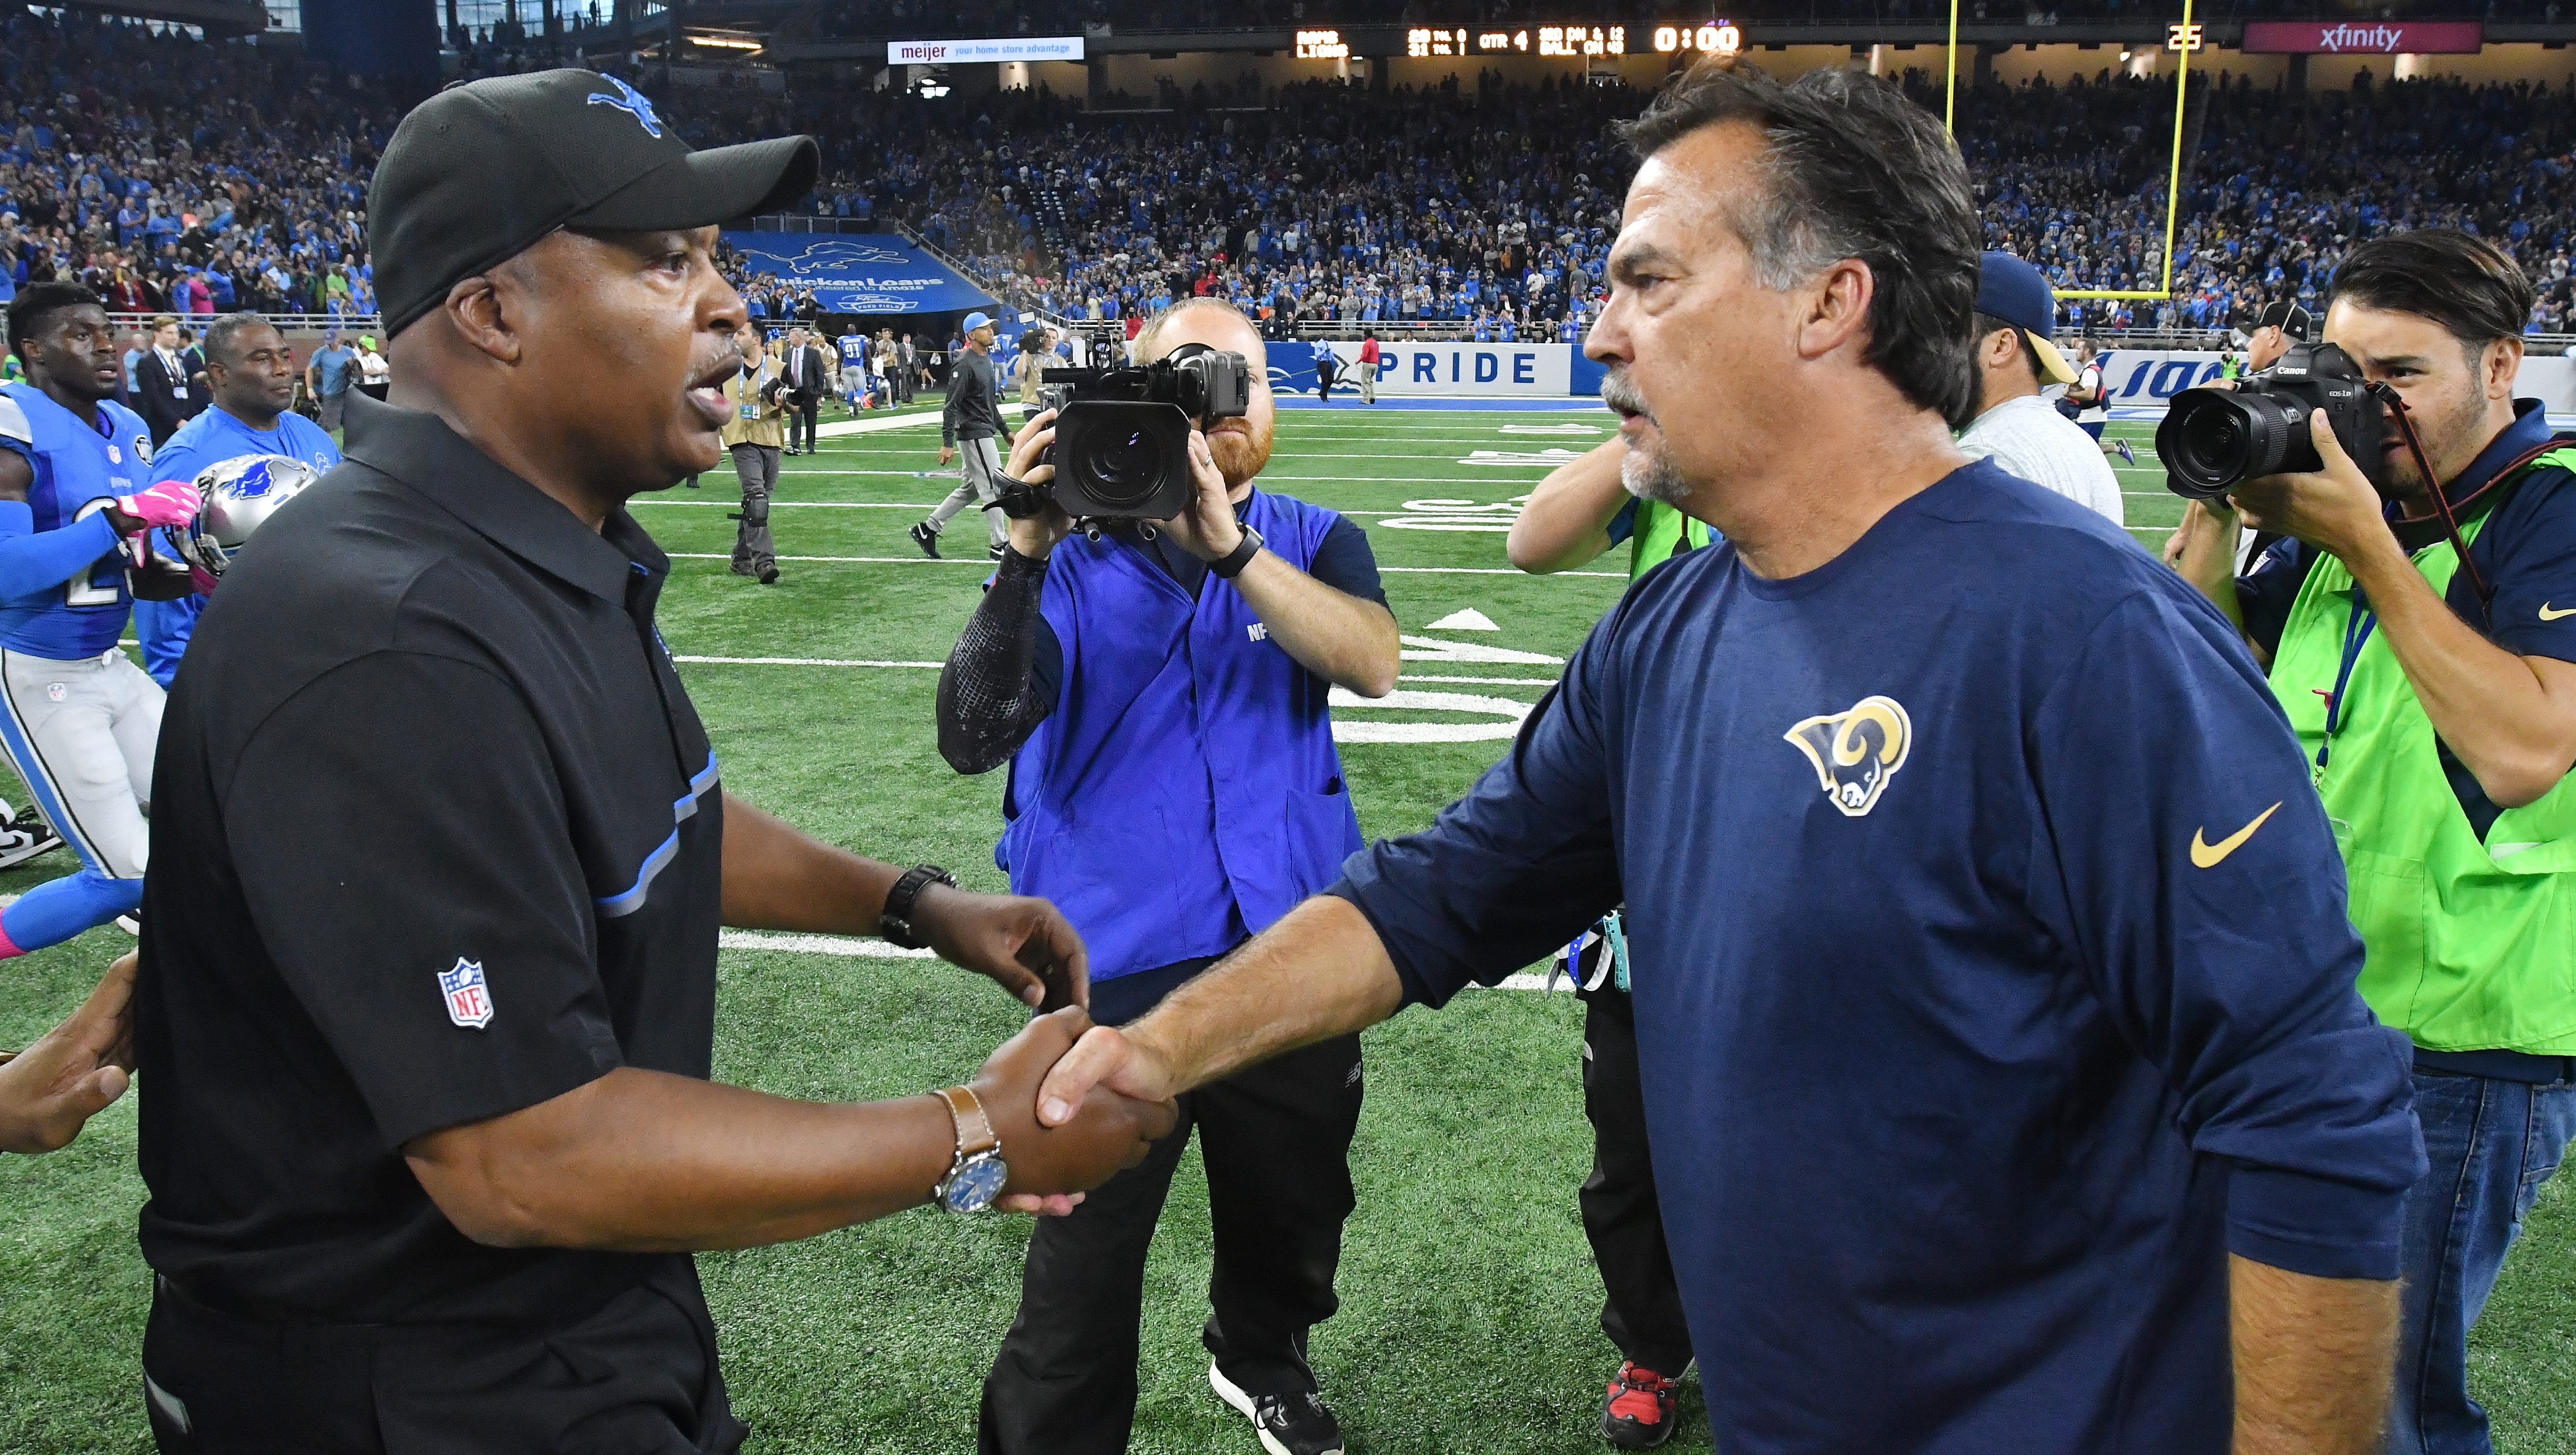 Lions head coach James Caldwell and Rams head coach Jeff Fisher meet on the field after the 31-28 Detroit victory.